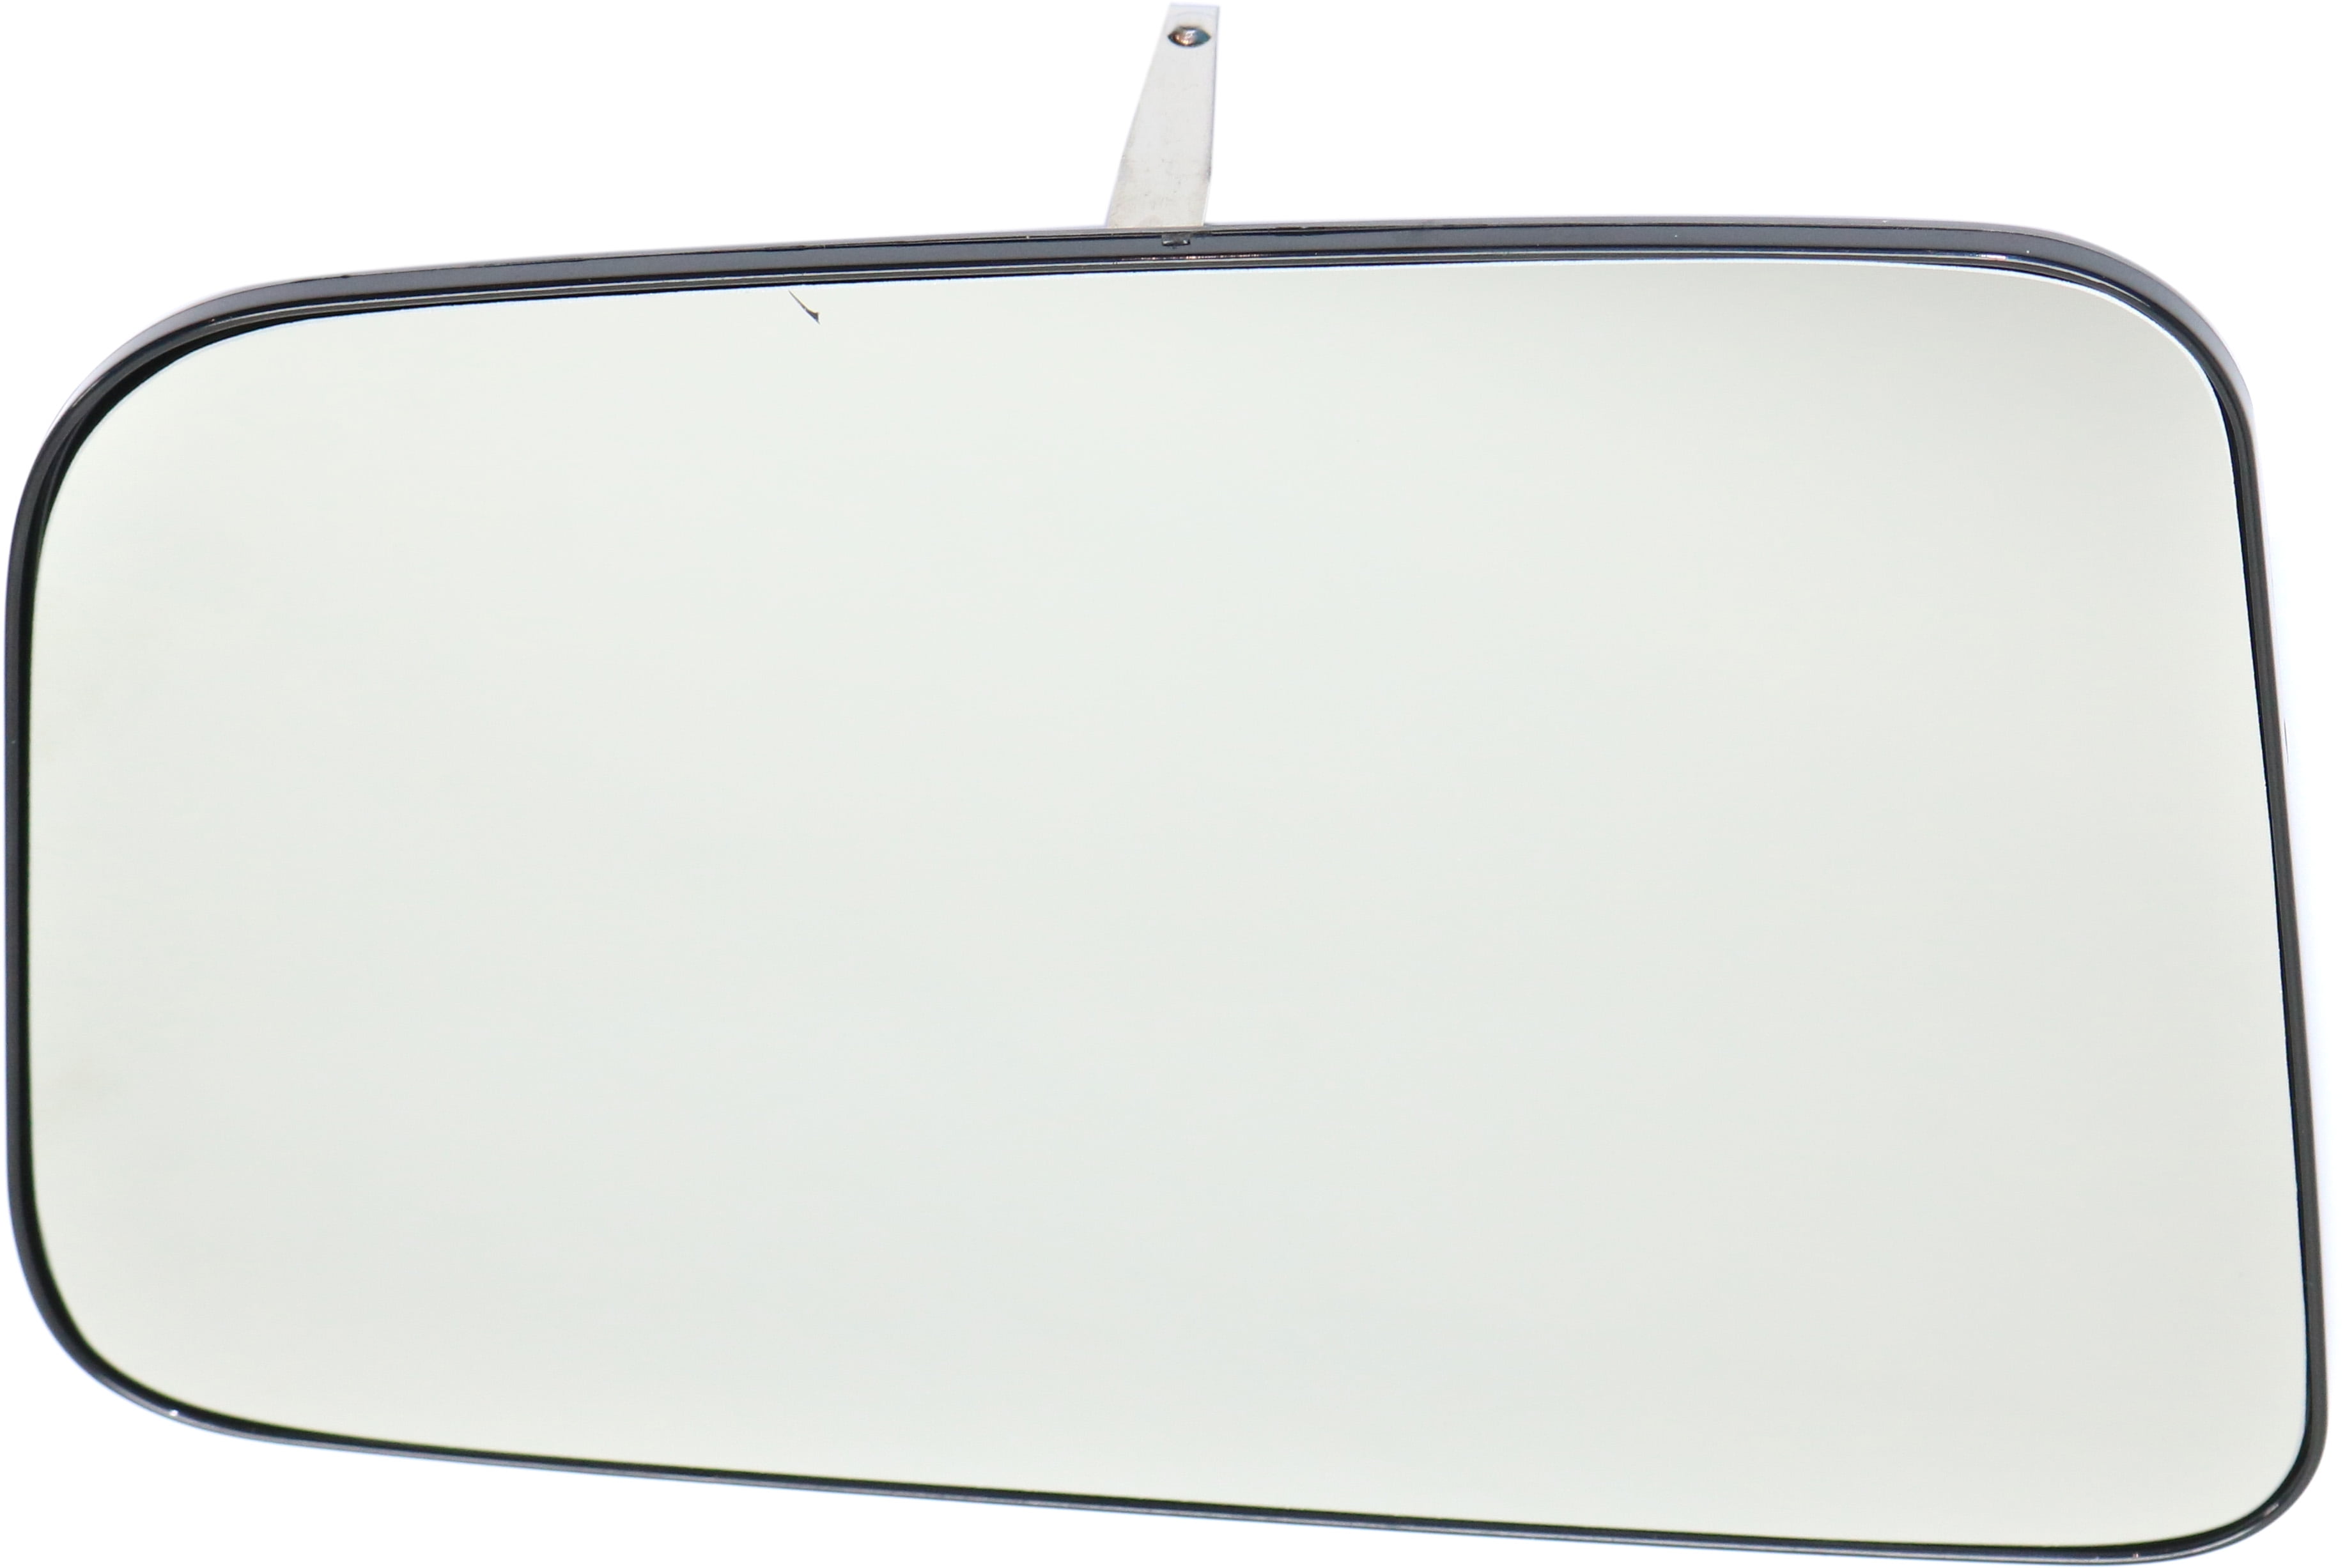 Kool Vue FD306GR Mirror Glass for Ford Edge 07-08 Right Side w/Backing Plate 